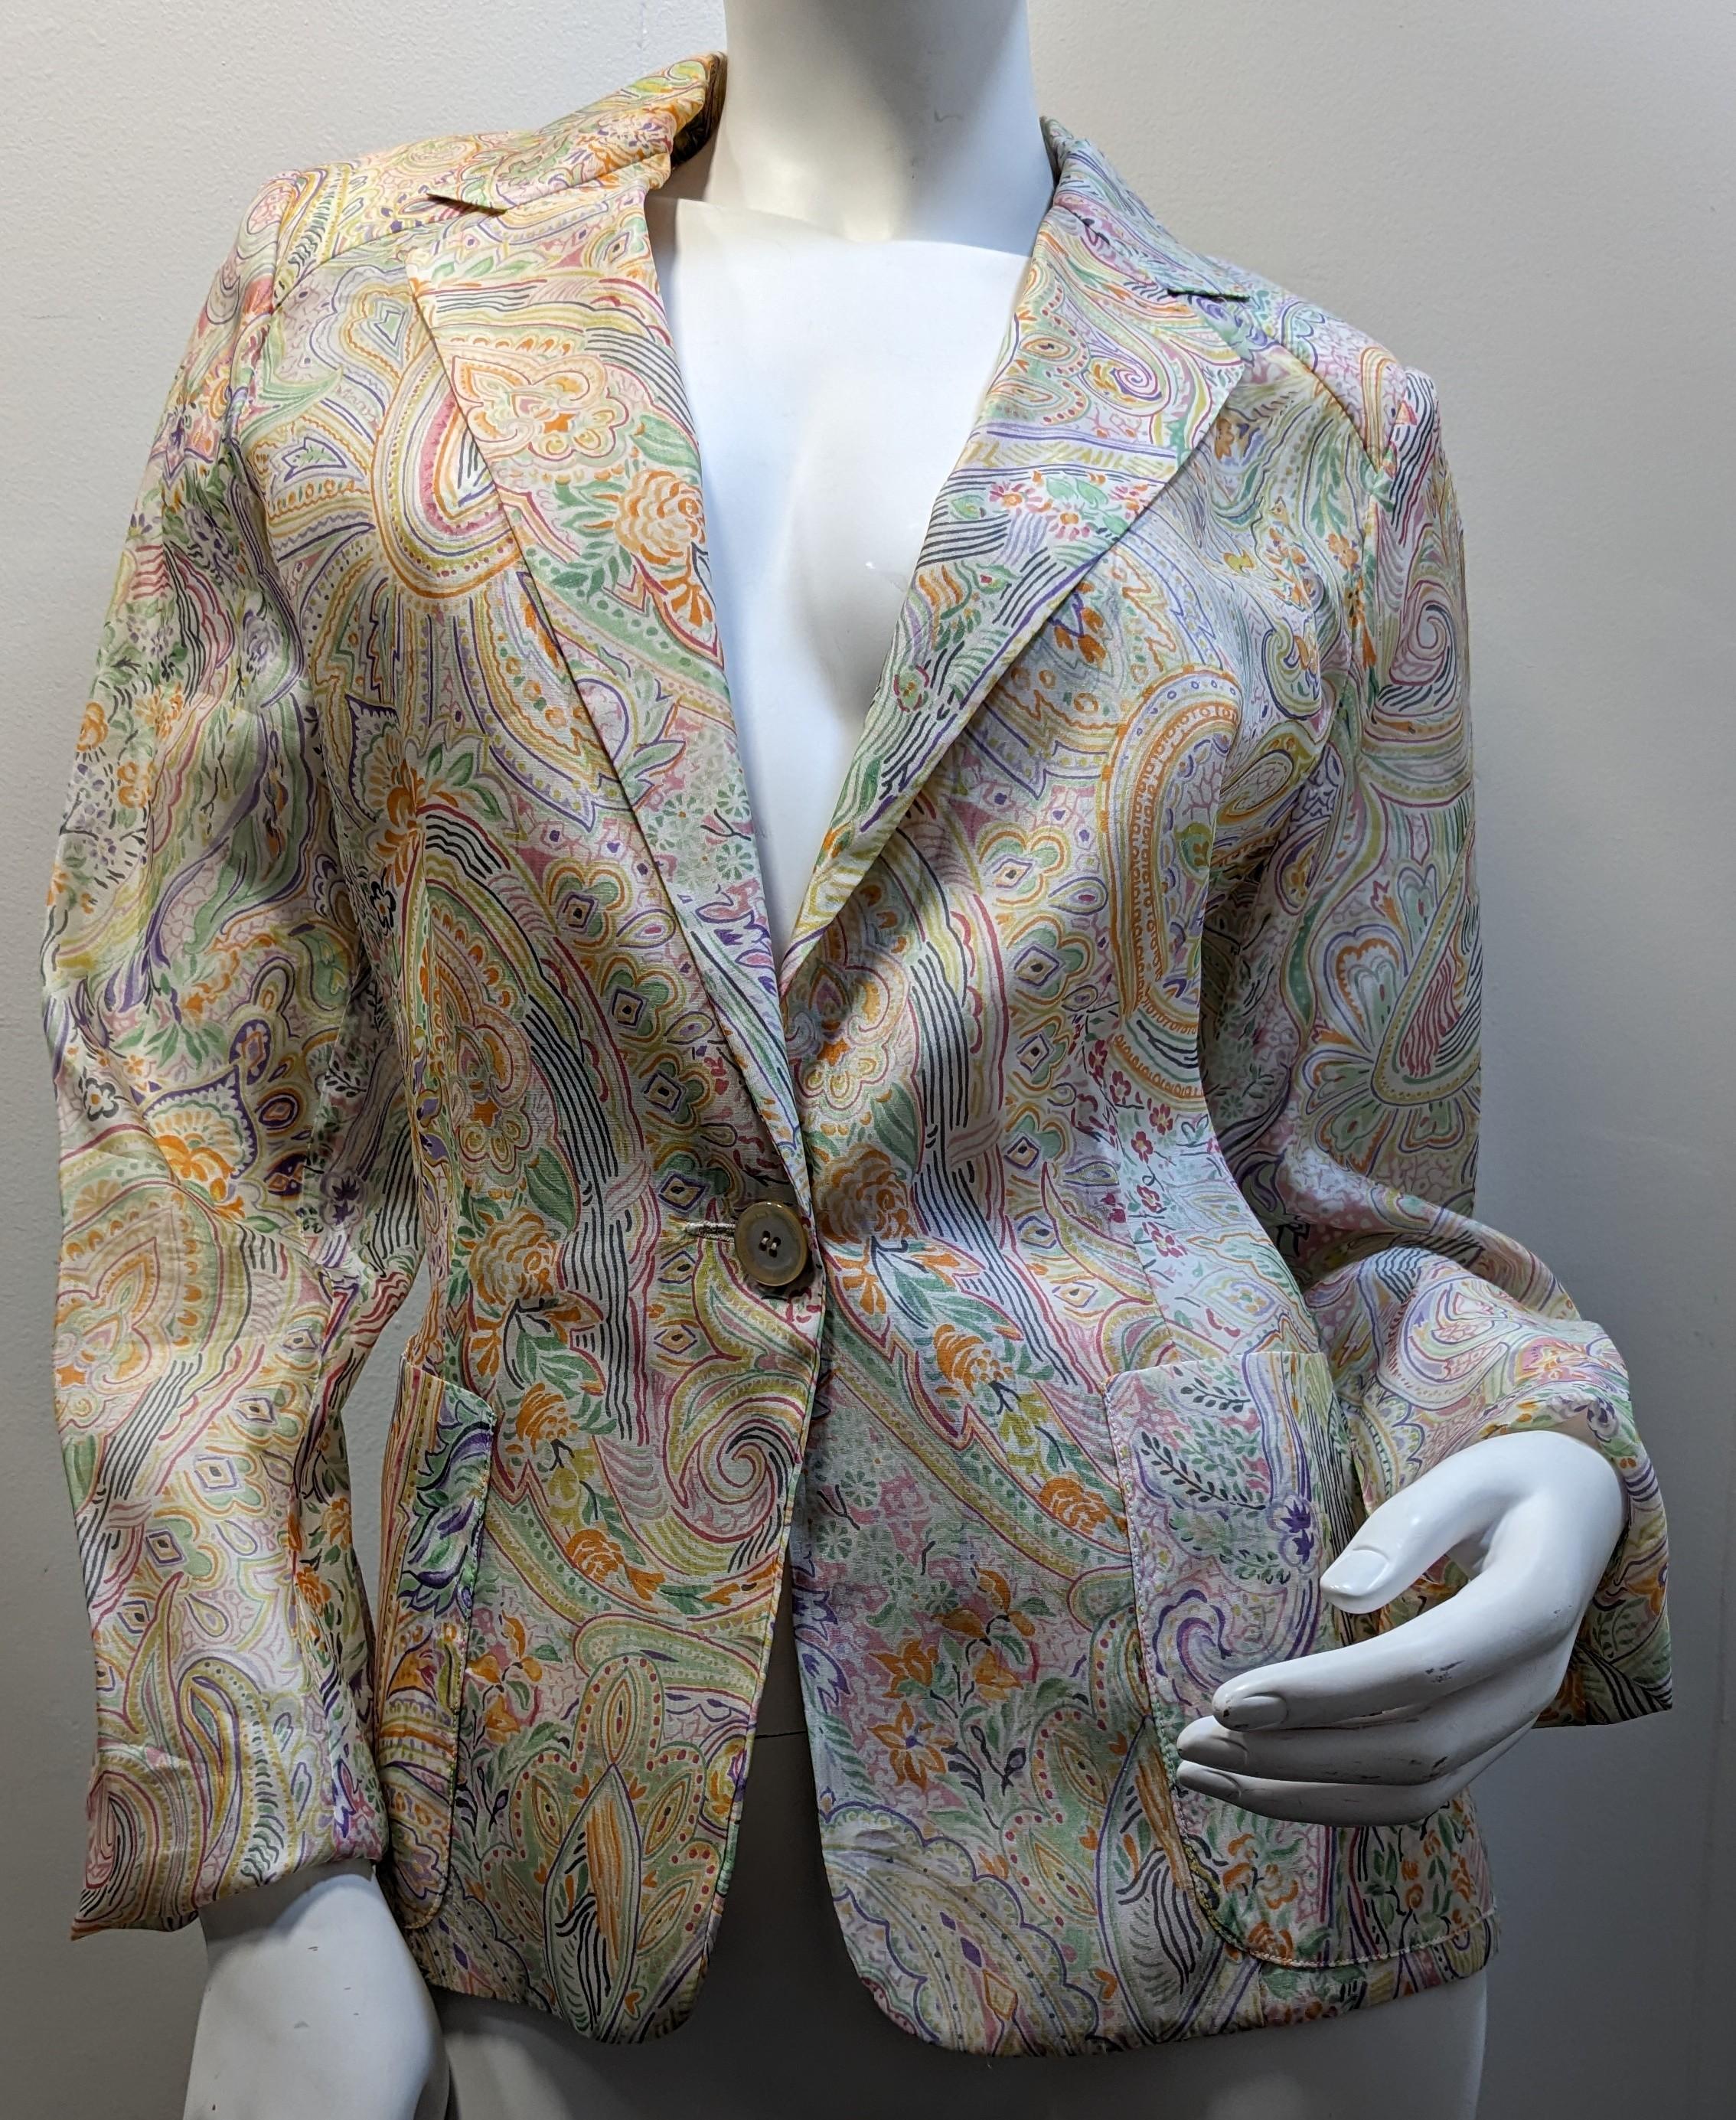 ETRO silk jacket made in Milano Italy Etro
Blazer multi-color, floral print, notch lapel, front button closure, long sleeves and front pockets.

Size 46
Length from shoulder 65cm / 25,60 inches 
Length from sleeve 65cm / 25,60 inches
Composisoon